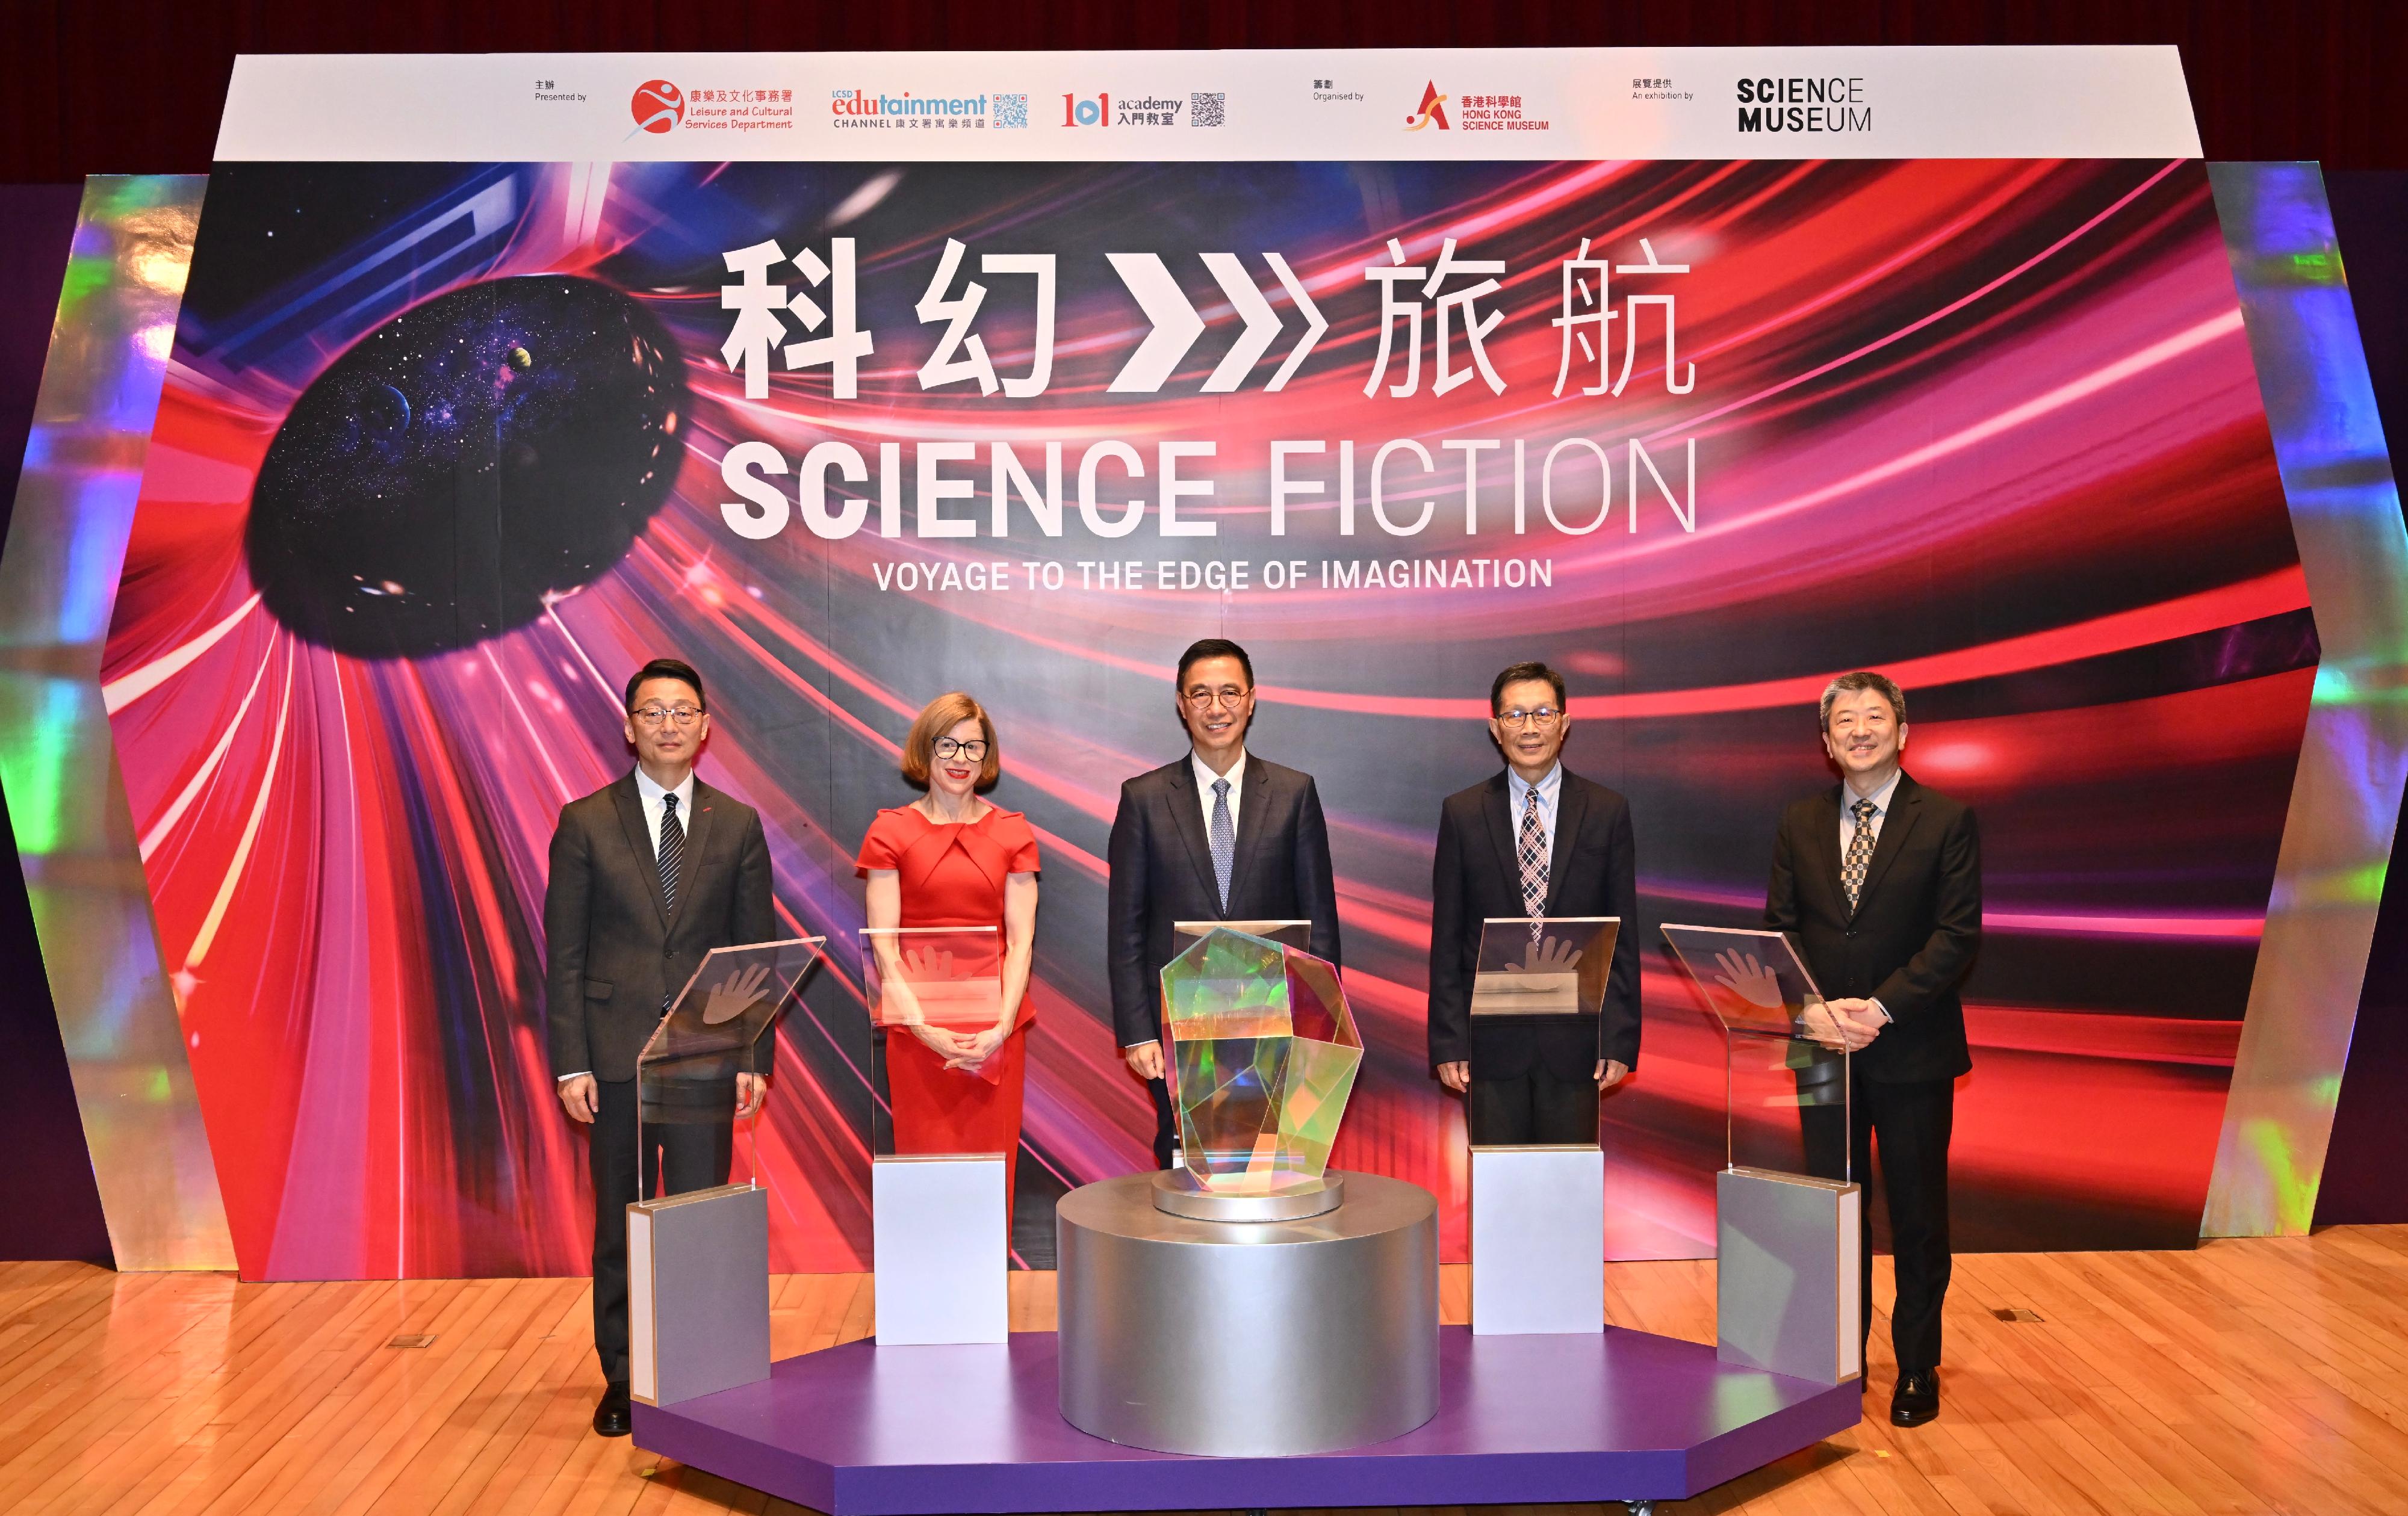 The opening ceremony for the "Science Fiction: Voyage to the Edge of Imagination" special exhibition was held today (December 14) at the Hong Kong Science Museum (HKScM). Photo shows (from left) the Director of Leisure and Cultural Services, Mr Vincent Liu; the Deputy Director of the Science Museum, London, Dr Julia Knights; the Secretary for Culture, Sports and Tourism, Mr Kevin Yeung; the Chairman of Science Sub-committee, Museum Advisory Committee, Professor Ching Pak-chung; and the Museum Director of the HKScM, Mr Lawrence Lee, officiating at the ceremony.
